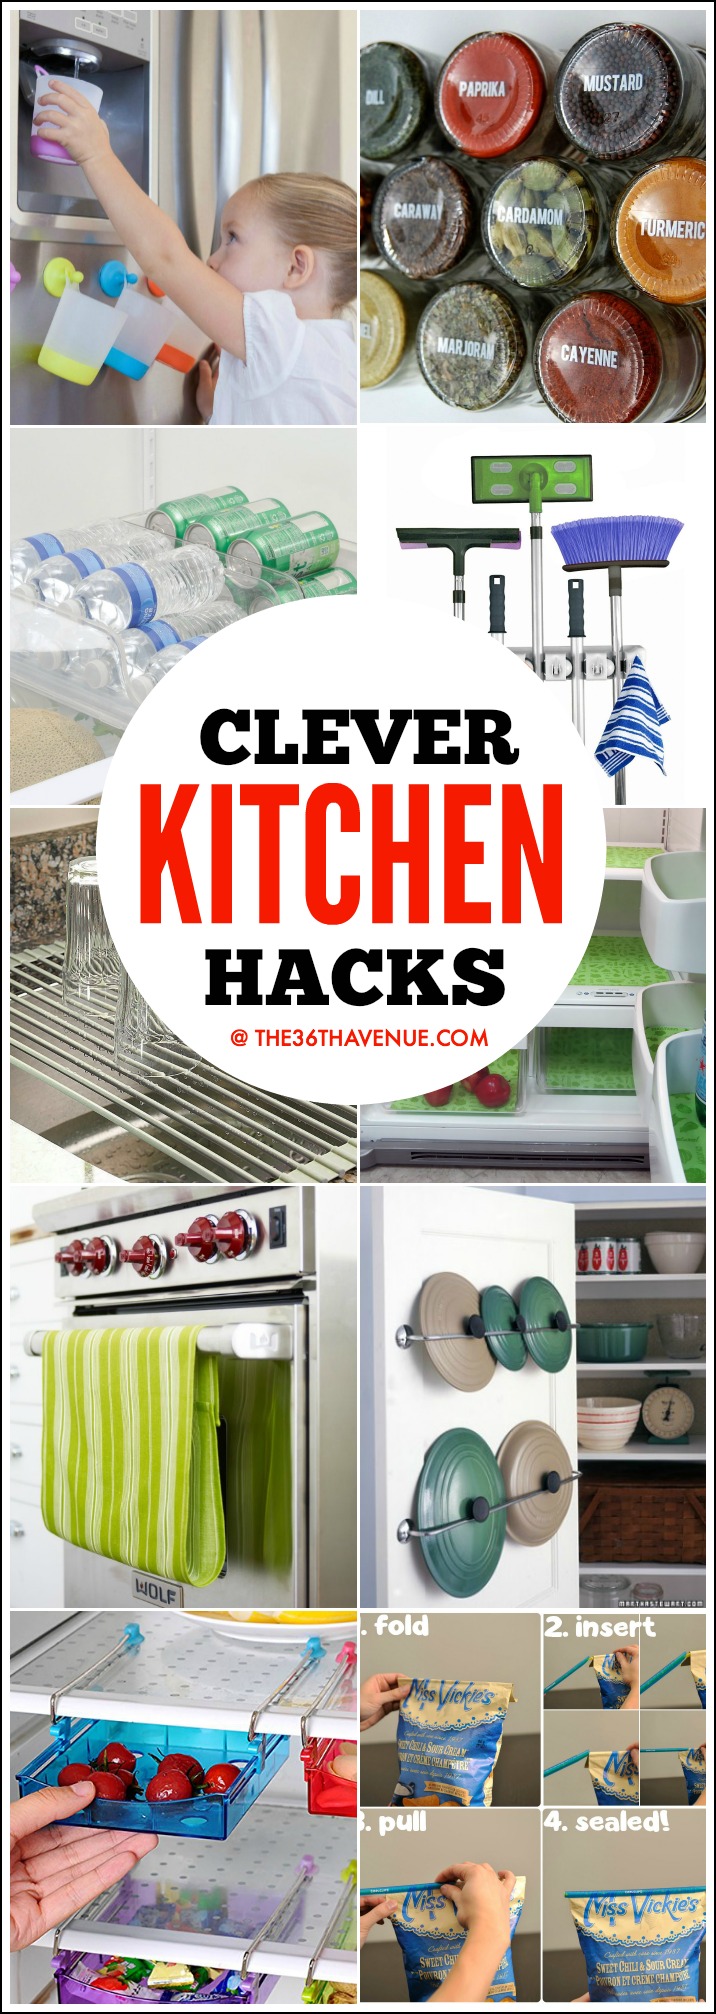 Top Kitchen Hacks And Gadgets The 36th AVENUE